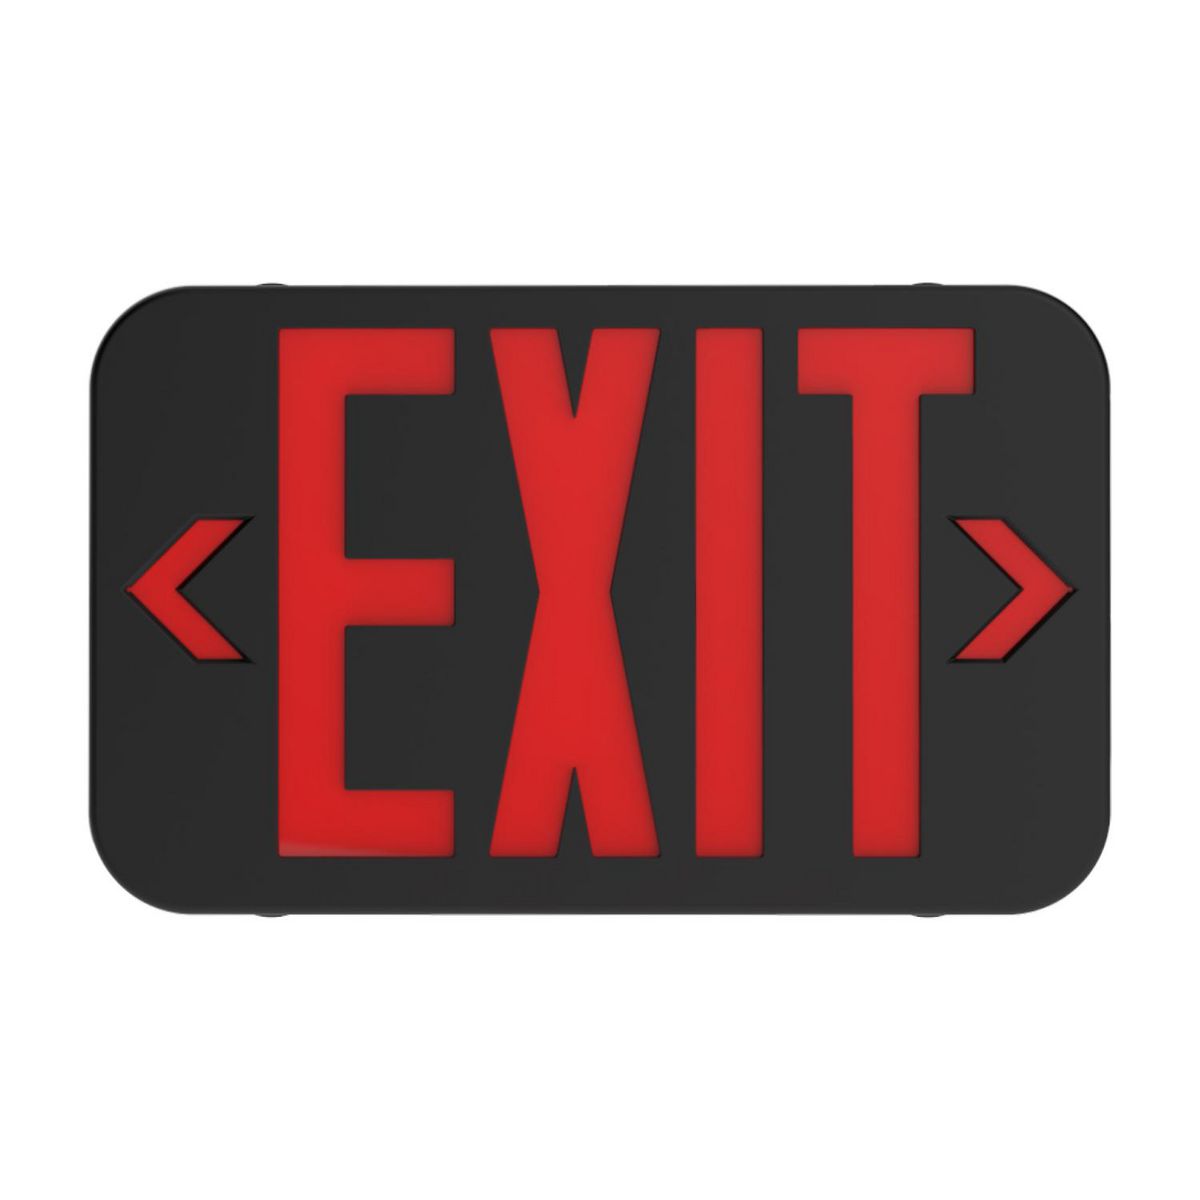 HUB CERB LED EXIT SIGN WITH BATTERY BACK-UP BLACK WITH RED LETTERS (NOT REMOTE CAPABLE)